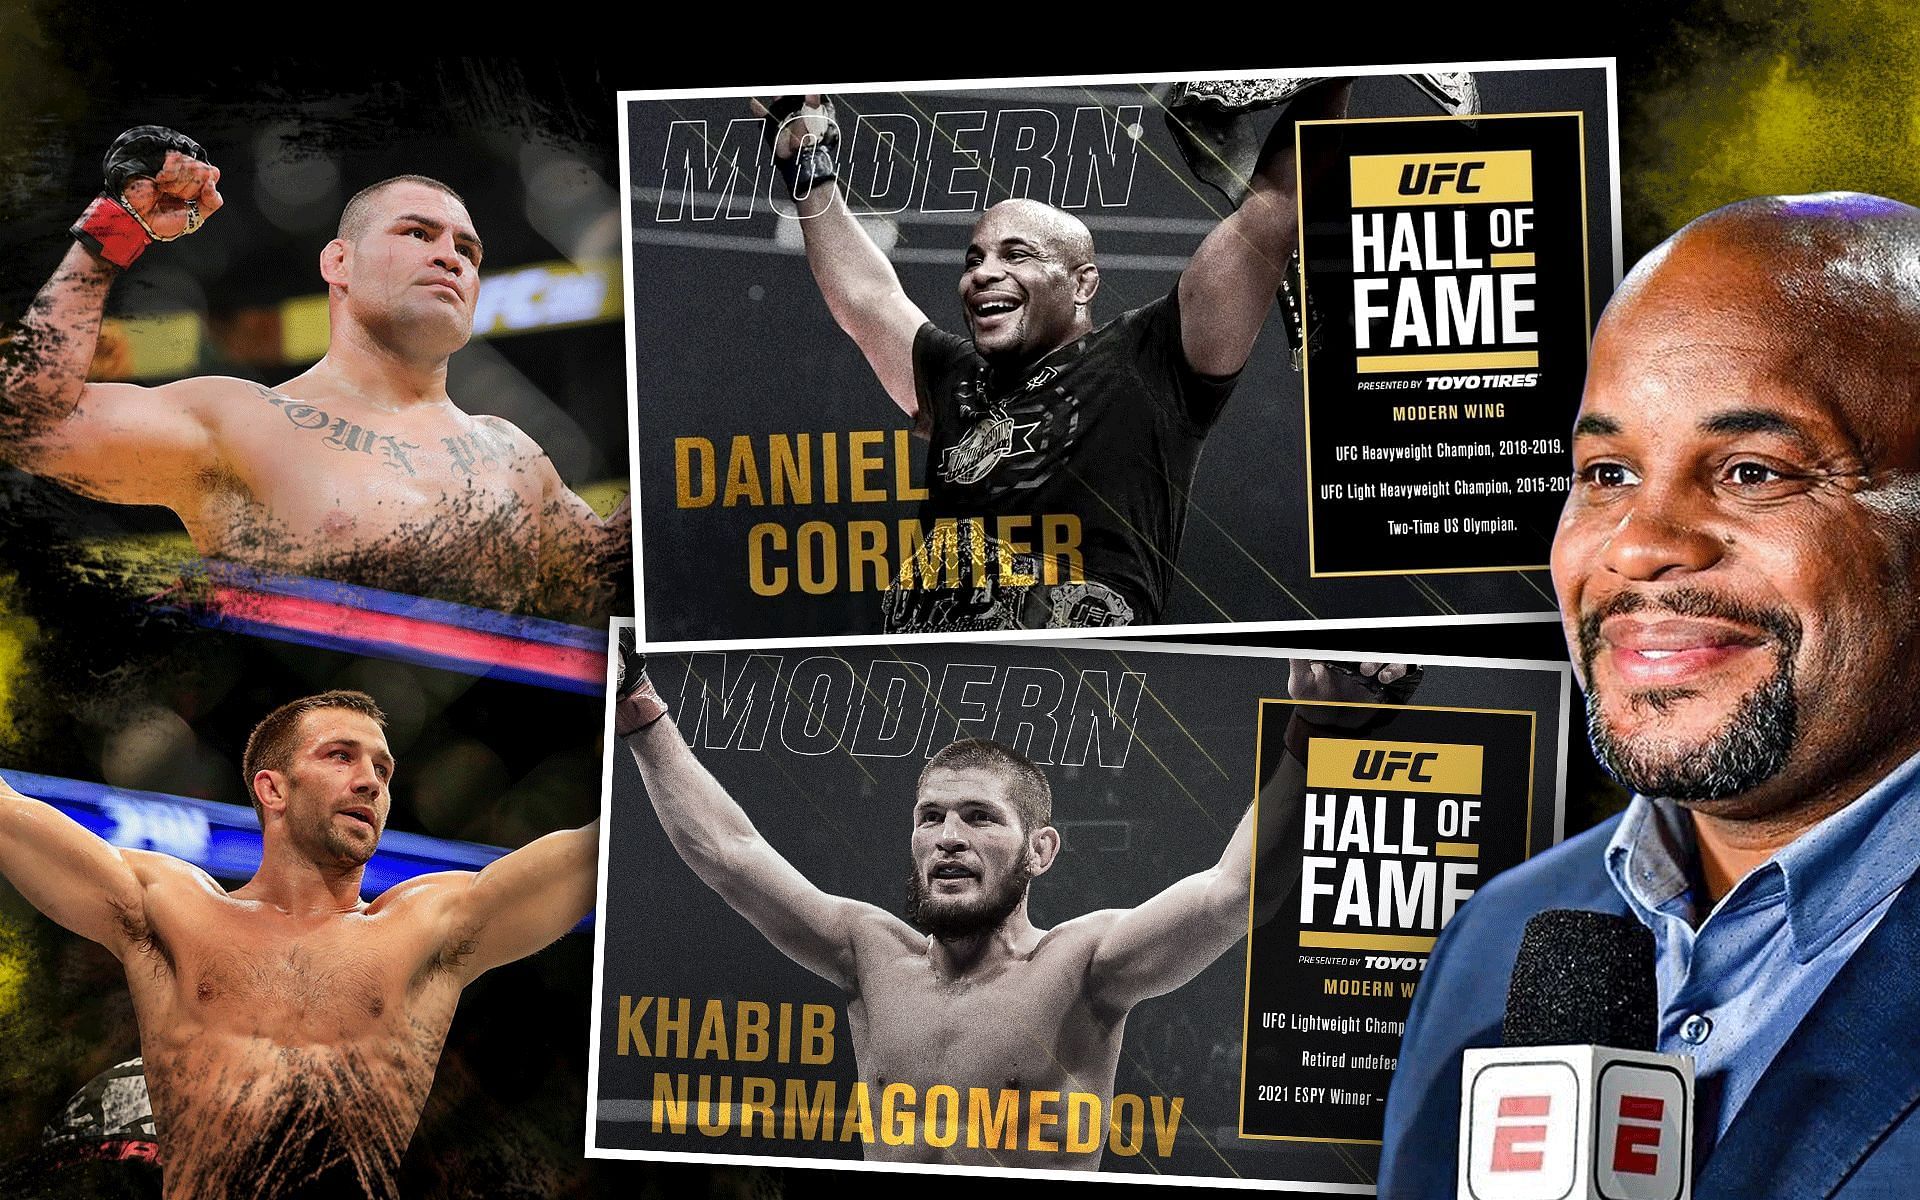 Daniel Cormier hopes Luke Rockhold and Cain Velasquez get into the UFC Hall of Fame [Photo credit: @UFC on Twitter]